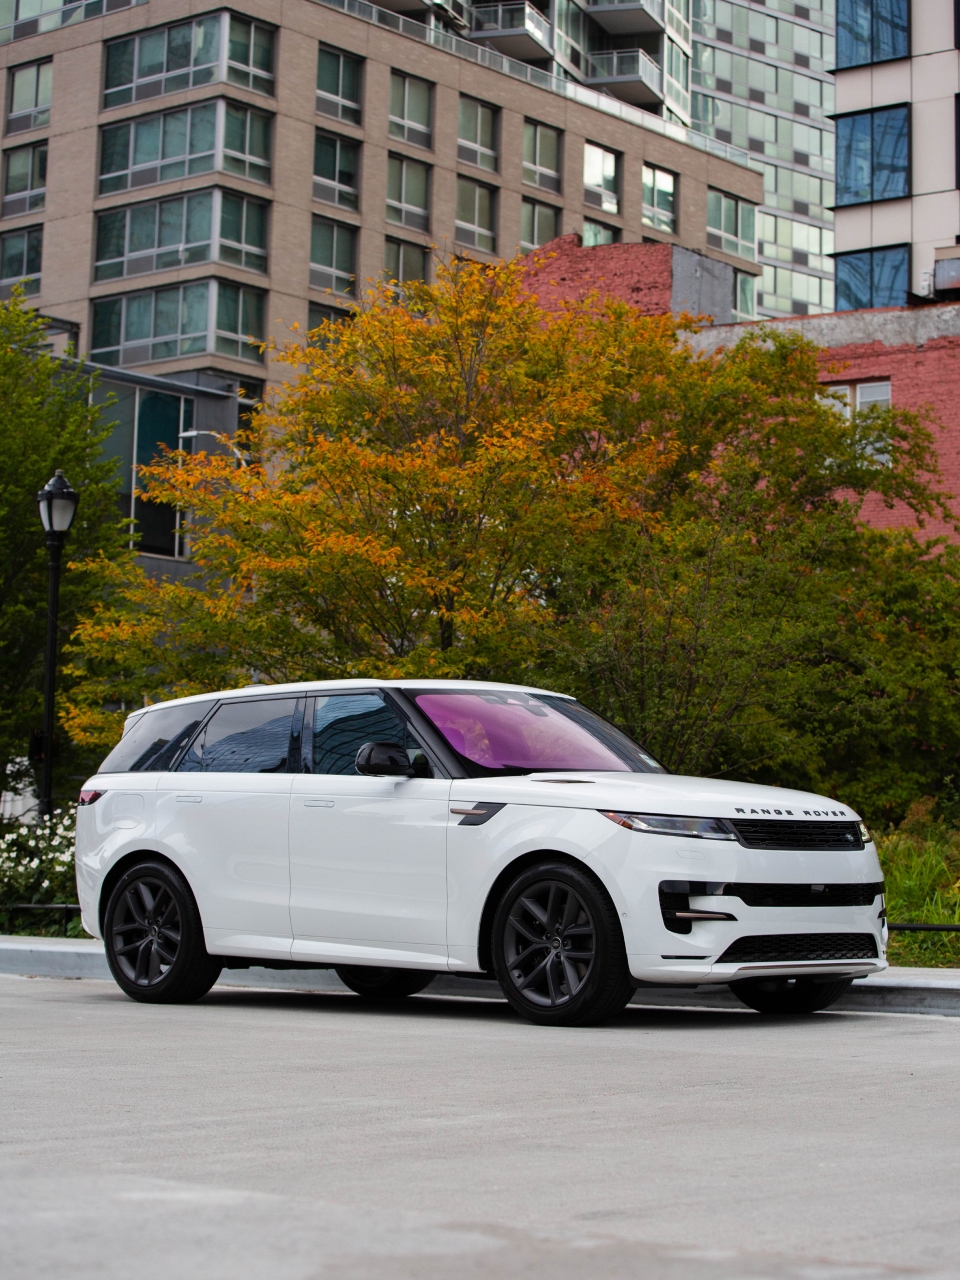 Rent a car Range Rover Sport in NYC